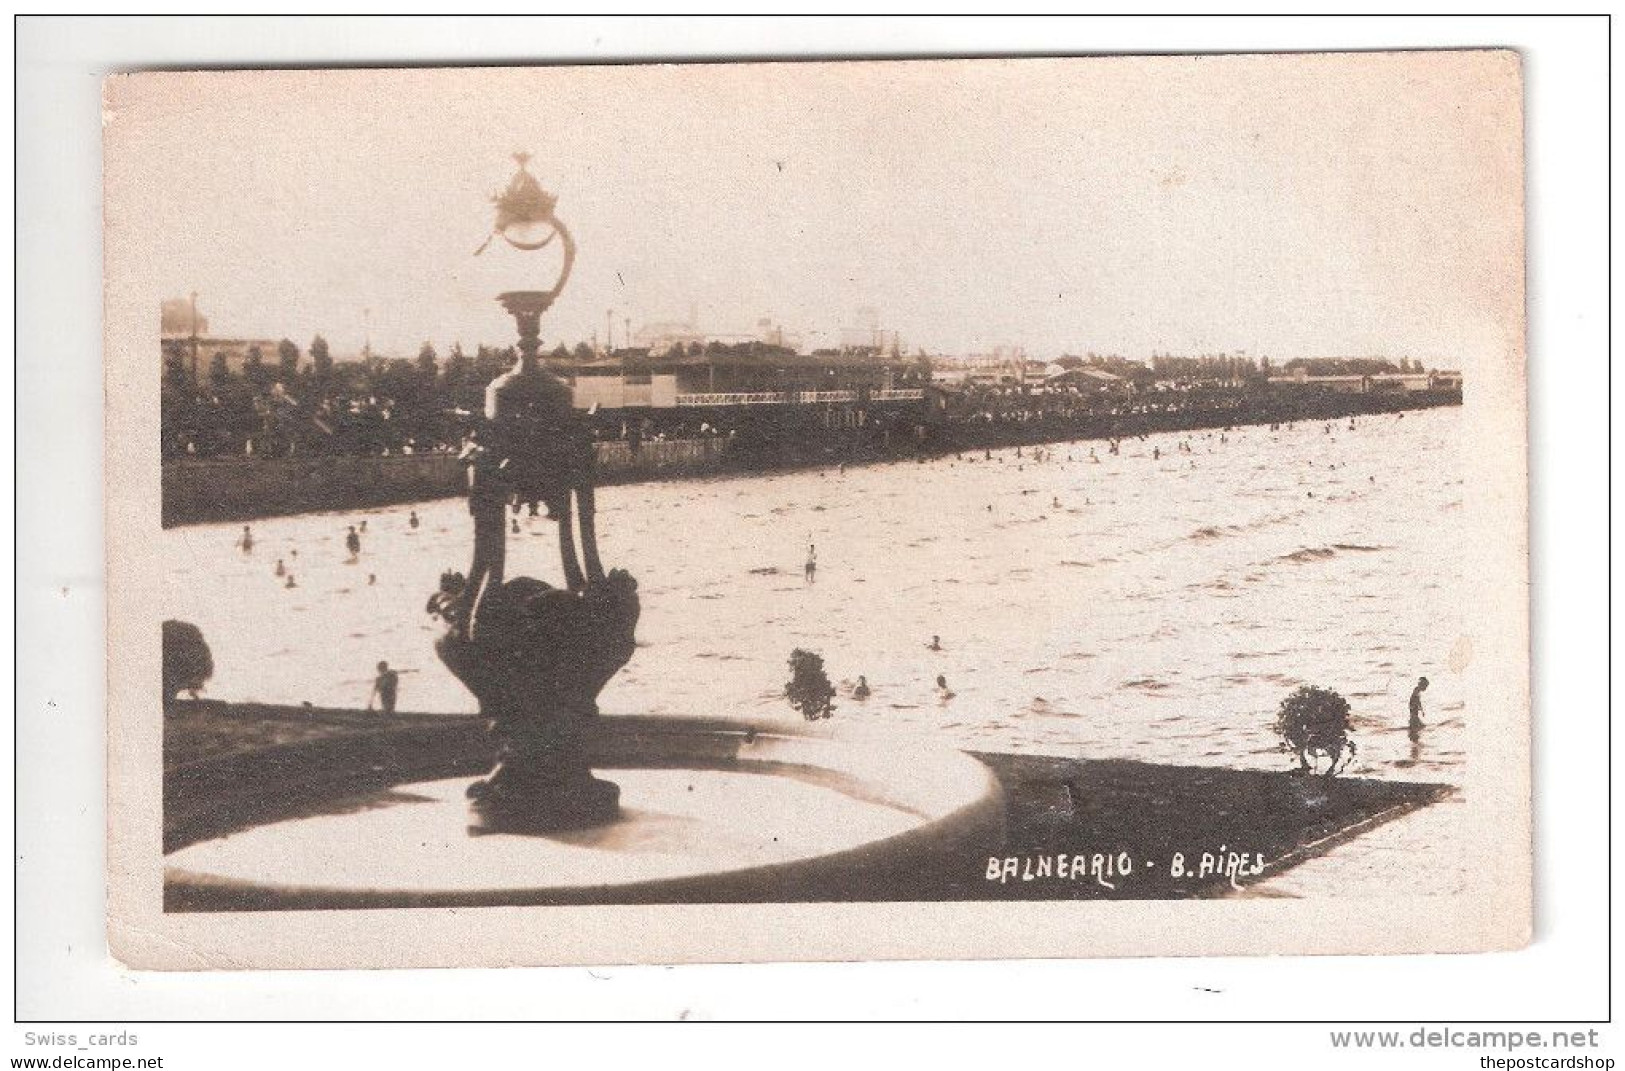 ARGENTINE - ARGENTINA - Buenos Aires BALNEARIO USED LIDO SWIMMING POOL  I CLYDE ROAD  WEST DIDSBURY  MANCHESTER  3/7/192 - Argentinië